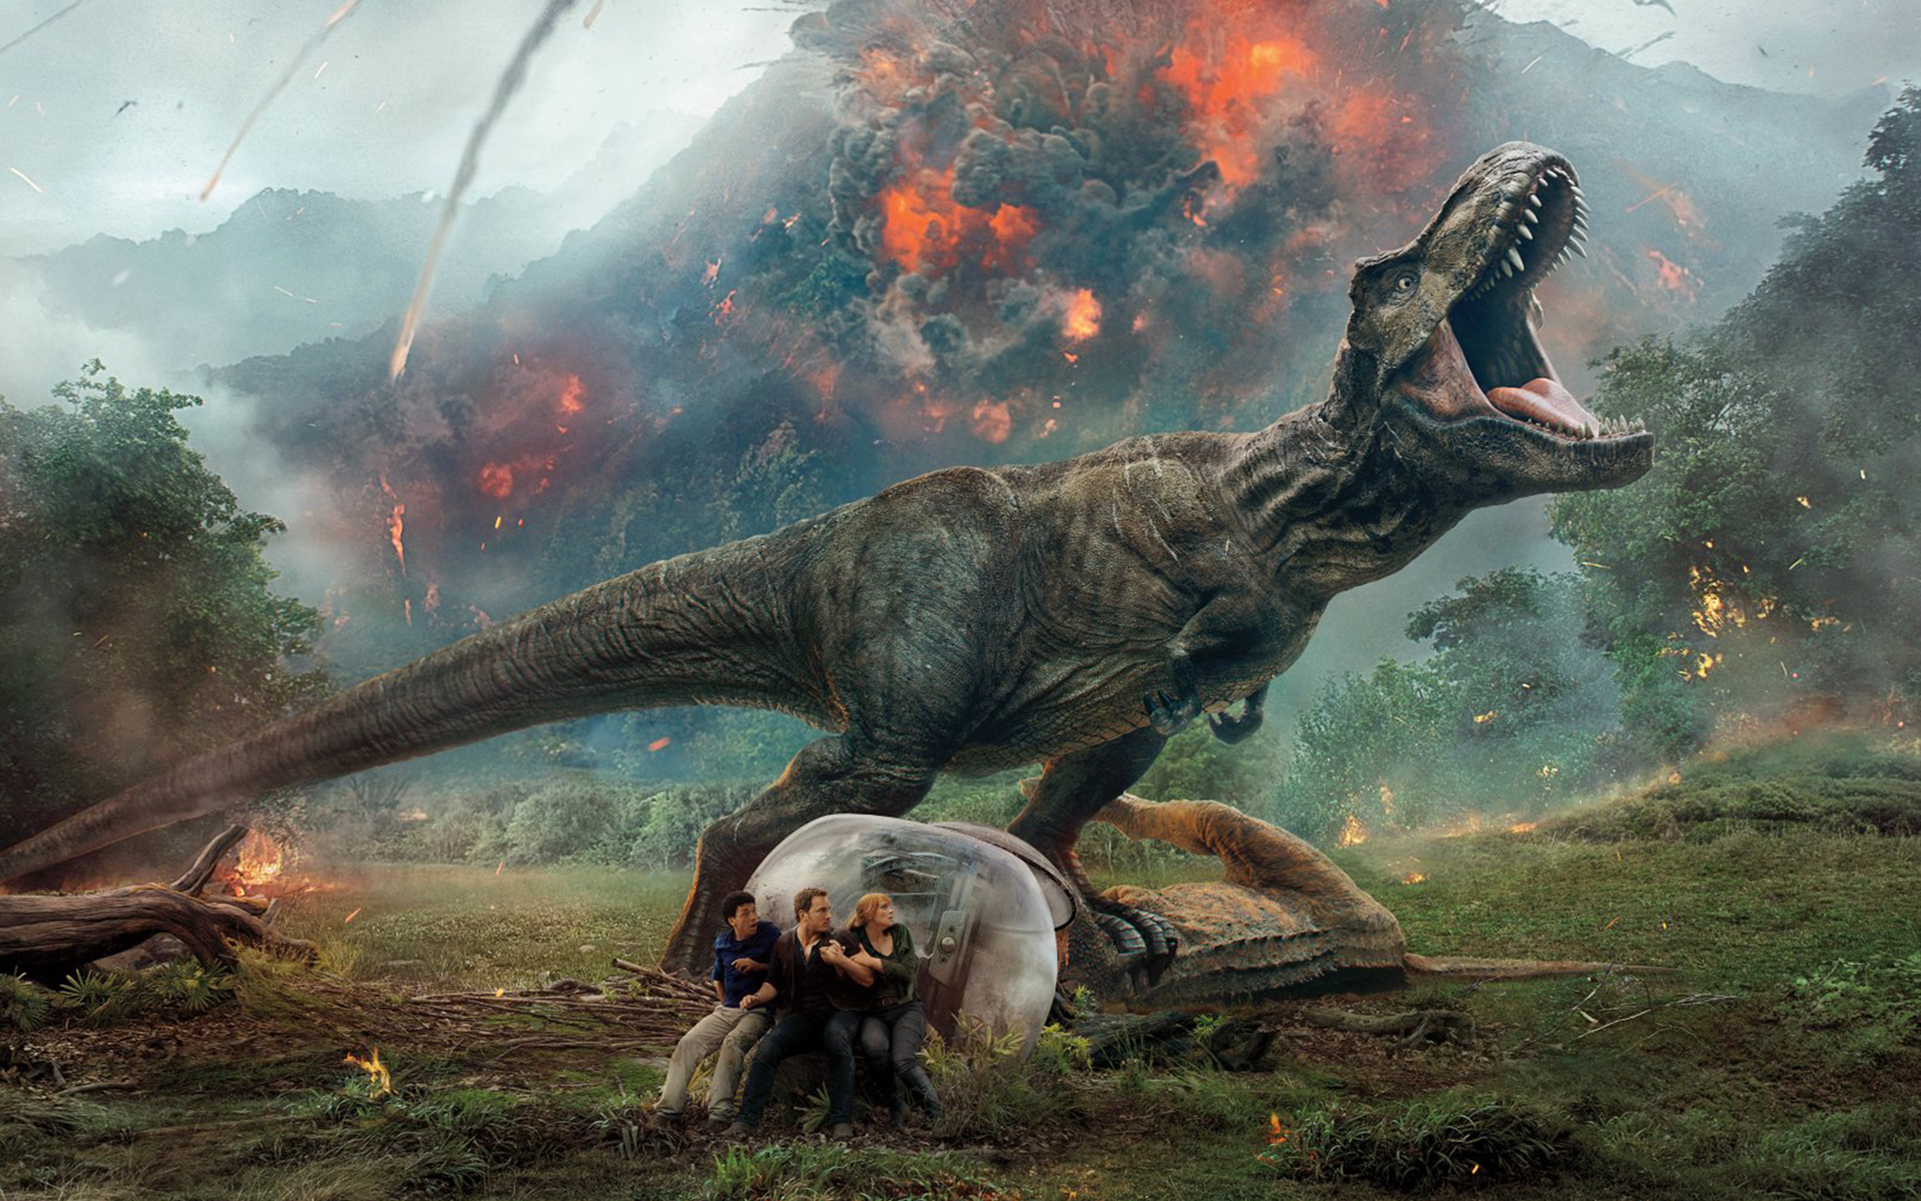 Jurassic World Dominion: Director Colin Trevorrow Says The Lockdown Enabled The VFX Team To Get A Head Start